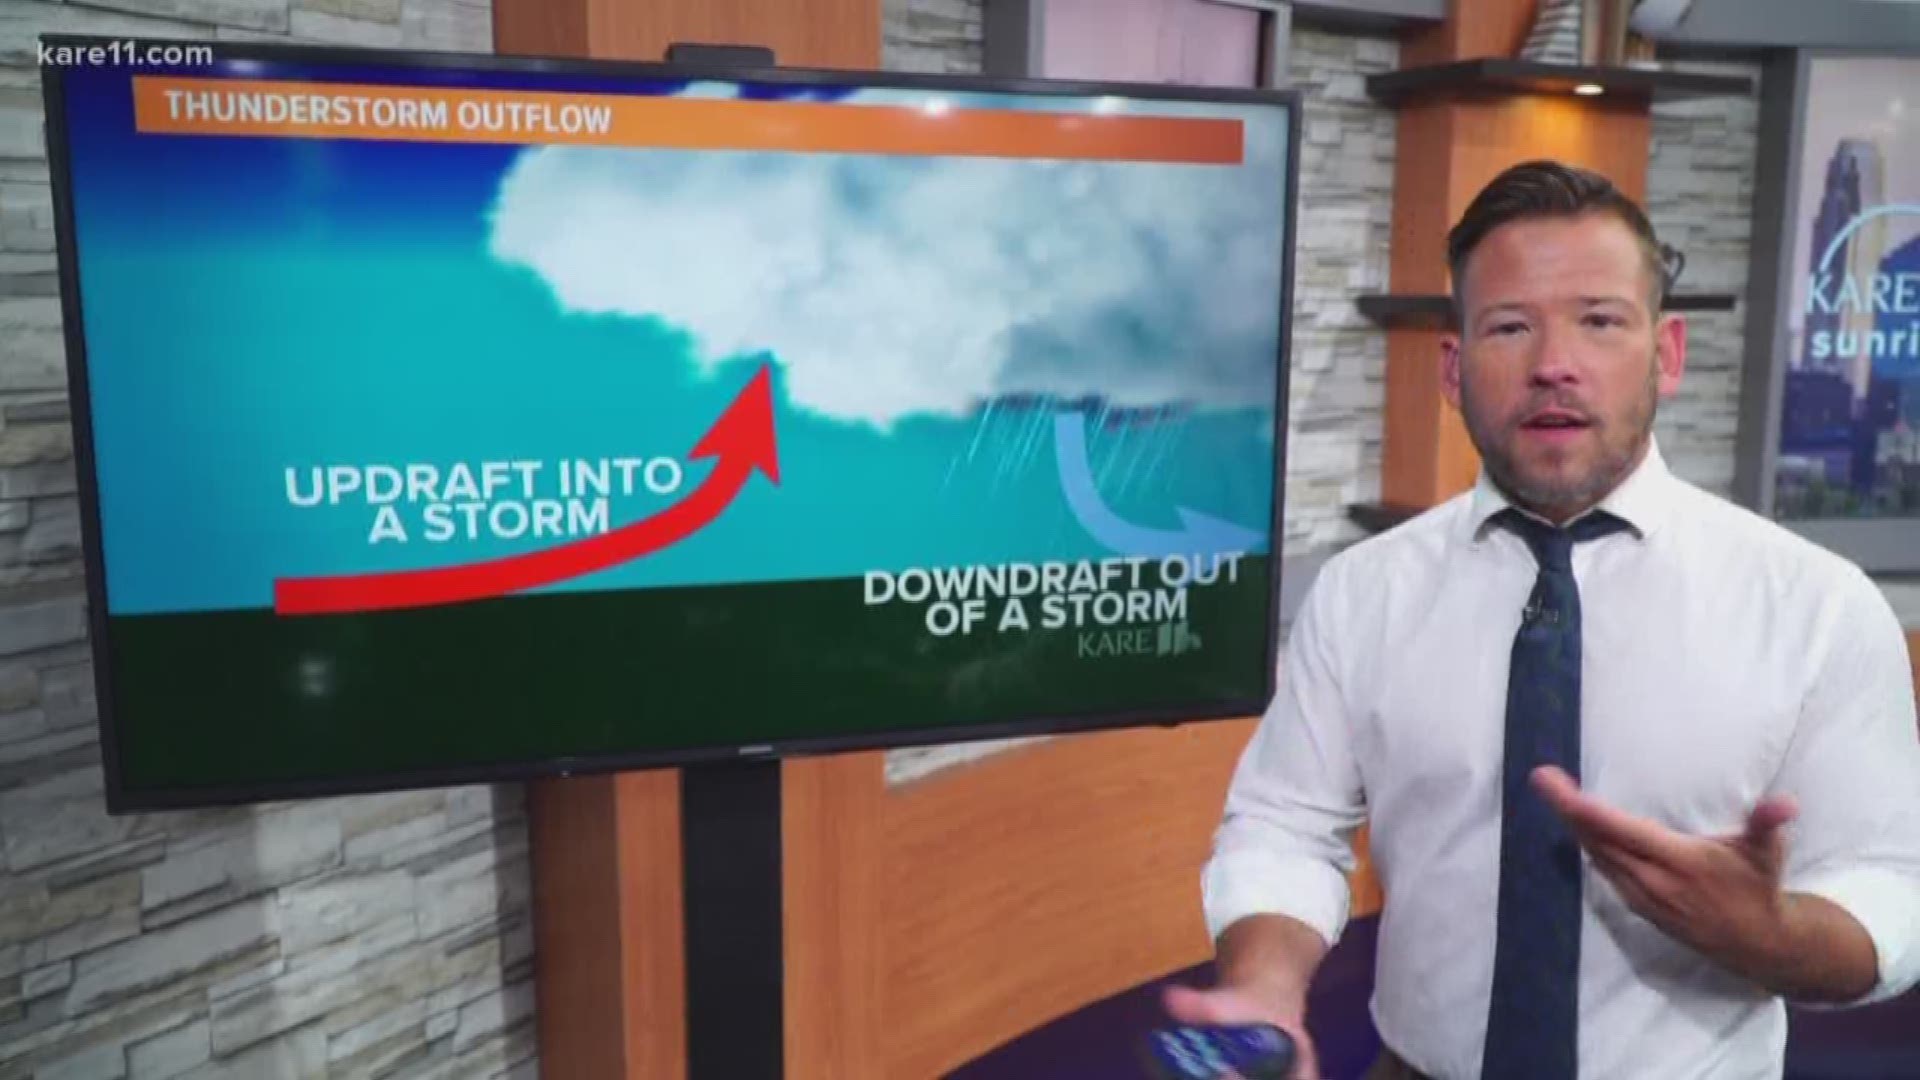 Tuesday's storms popped up seemingly out of nowhere and parked over Minneapolis, creating flash flooding. So what is it that makes for storms that don't move? Sven Explains.